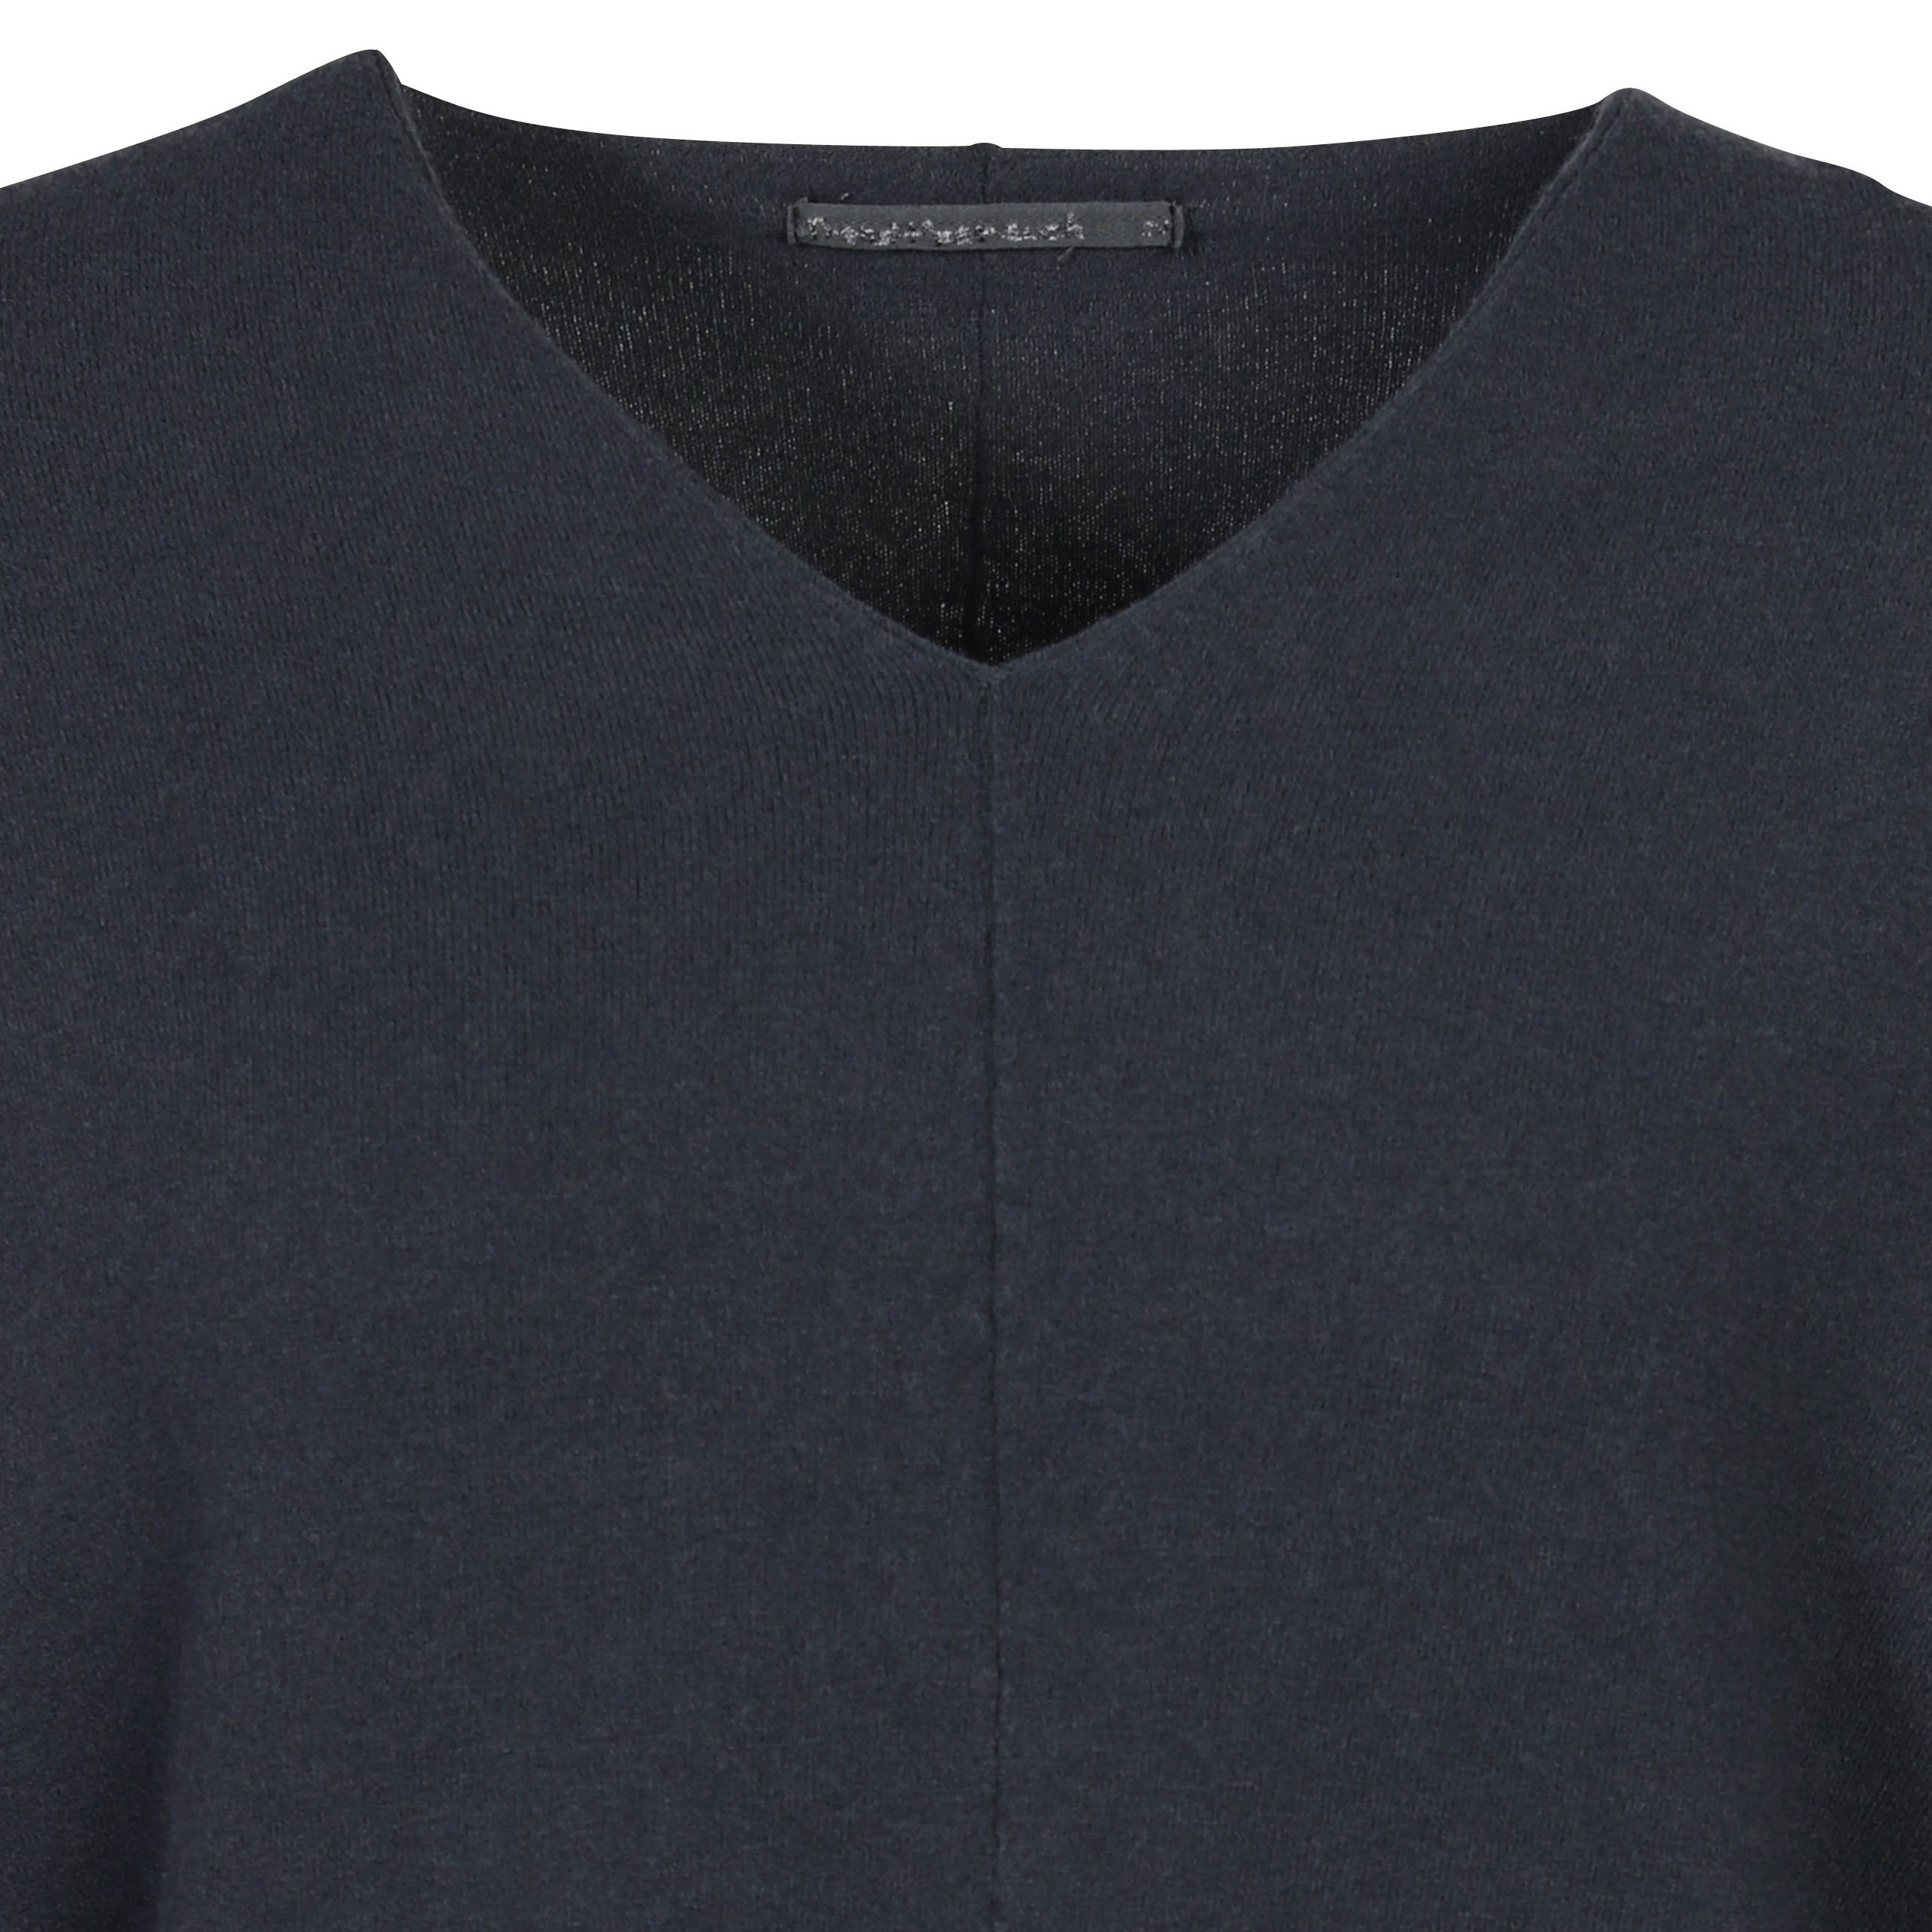 Transit par Such Pullover in Anthracit XS